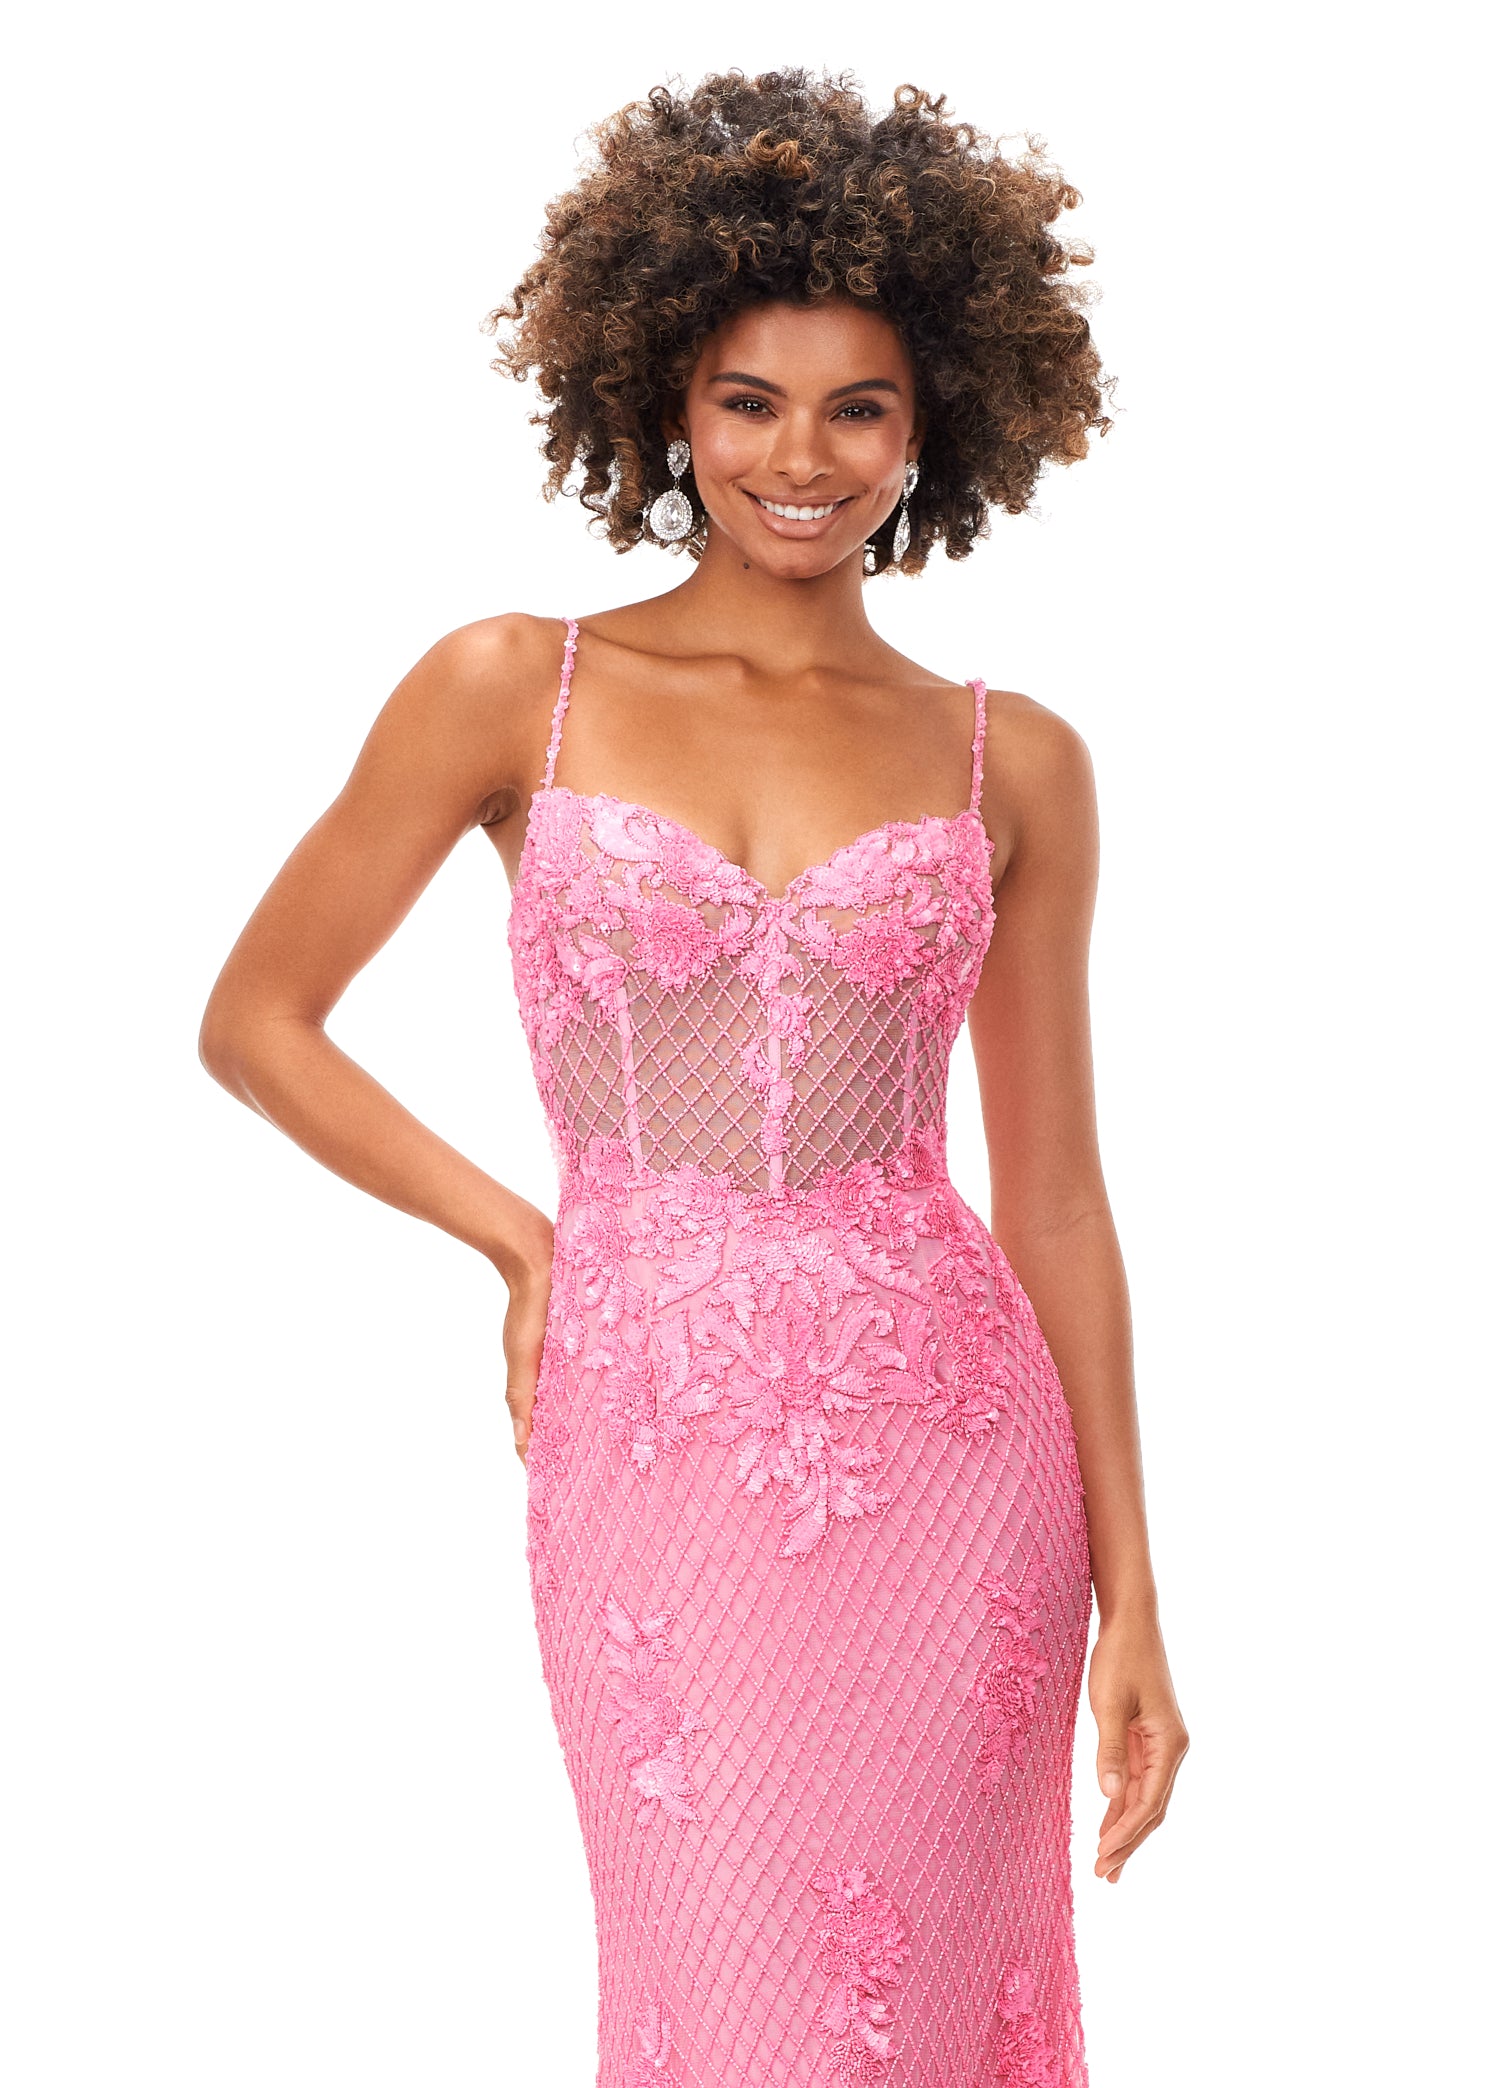 Ashley Lauren 11362 Candy Pink Fully Beaded Spaghetti Strap Prom Dress front close up